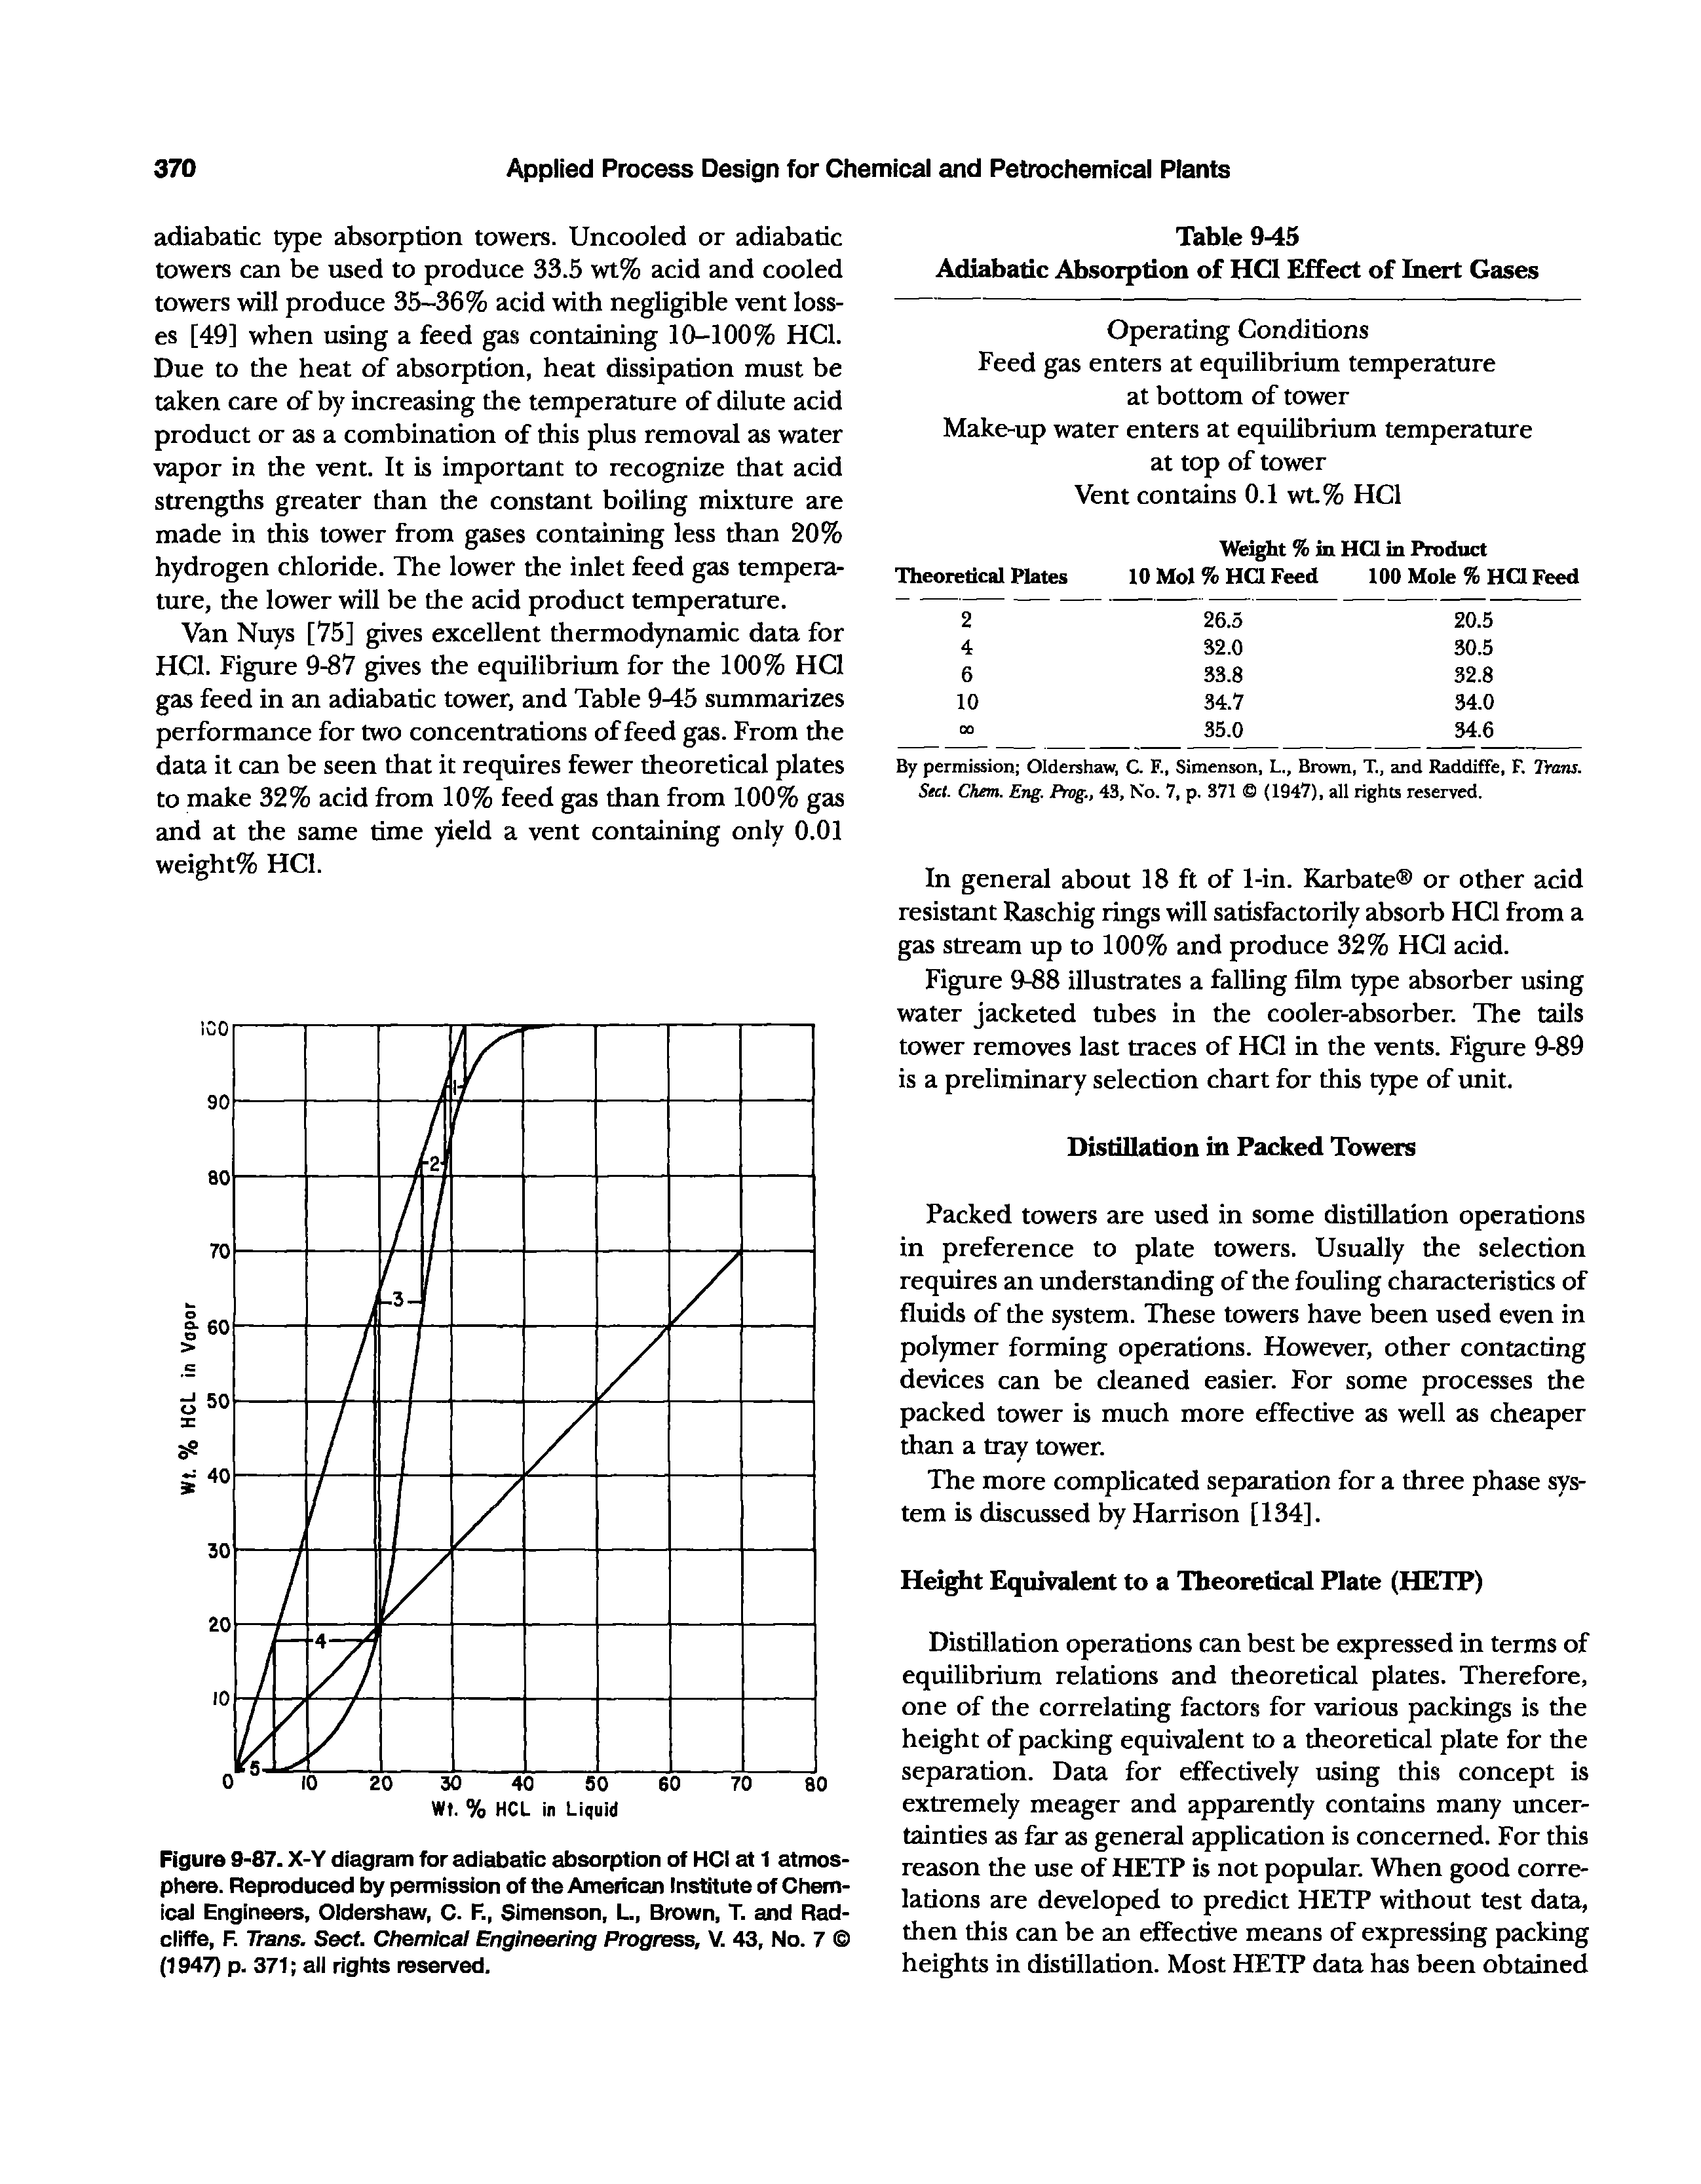 Figure 9-87. X-Y diagram for adicibatic absorption of HCl at 1 atmosphere. Reproduced by permission of the American Institute of Chemical Engineers, Oldershaw, C. F., Simenson, L, Brown, T. and Rad-cliffe, F. Trans. Sect. Chemical Engineering Progress, V. 43, No. 7 (1947) p. 371 all rights reserved.